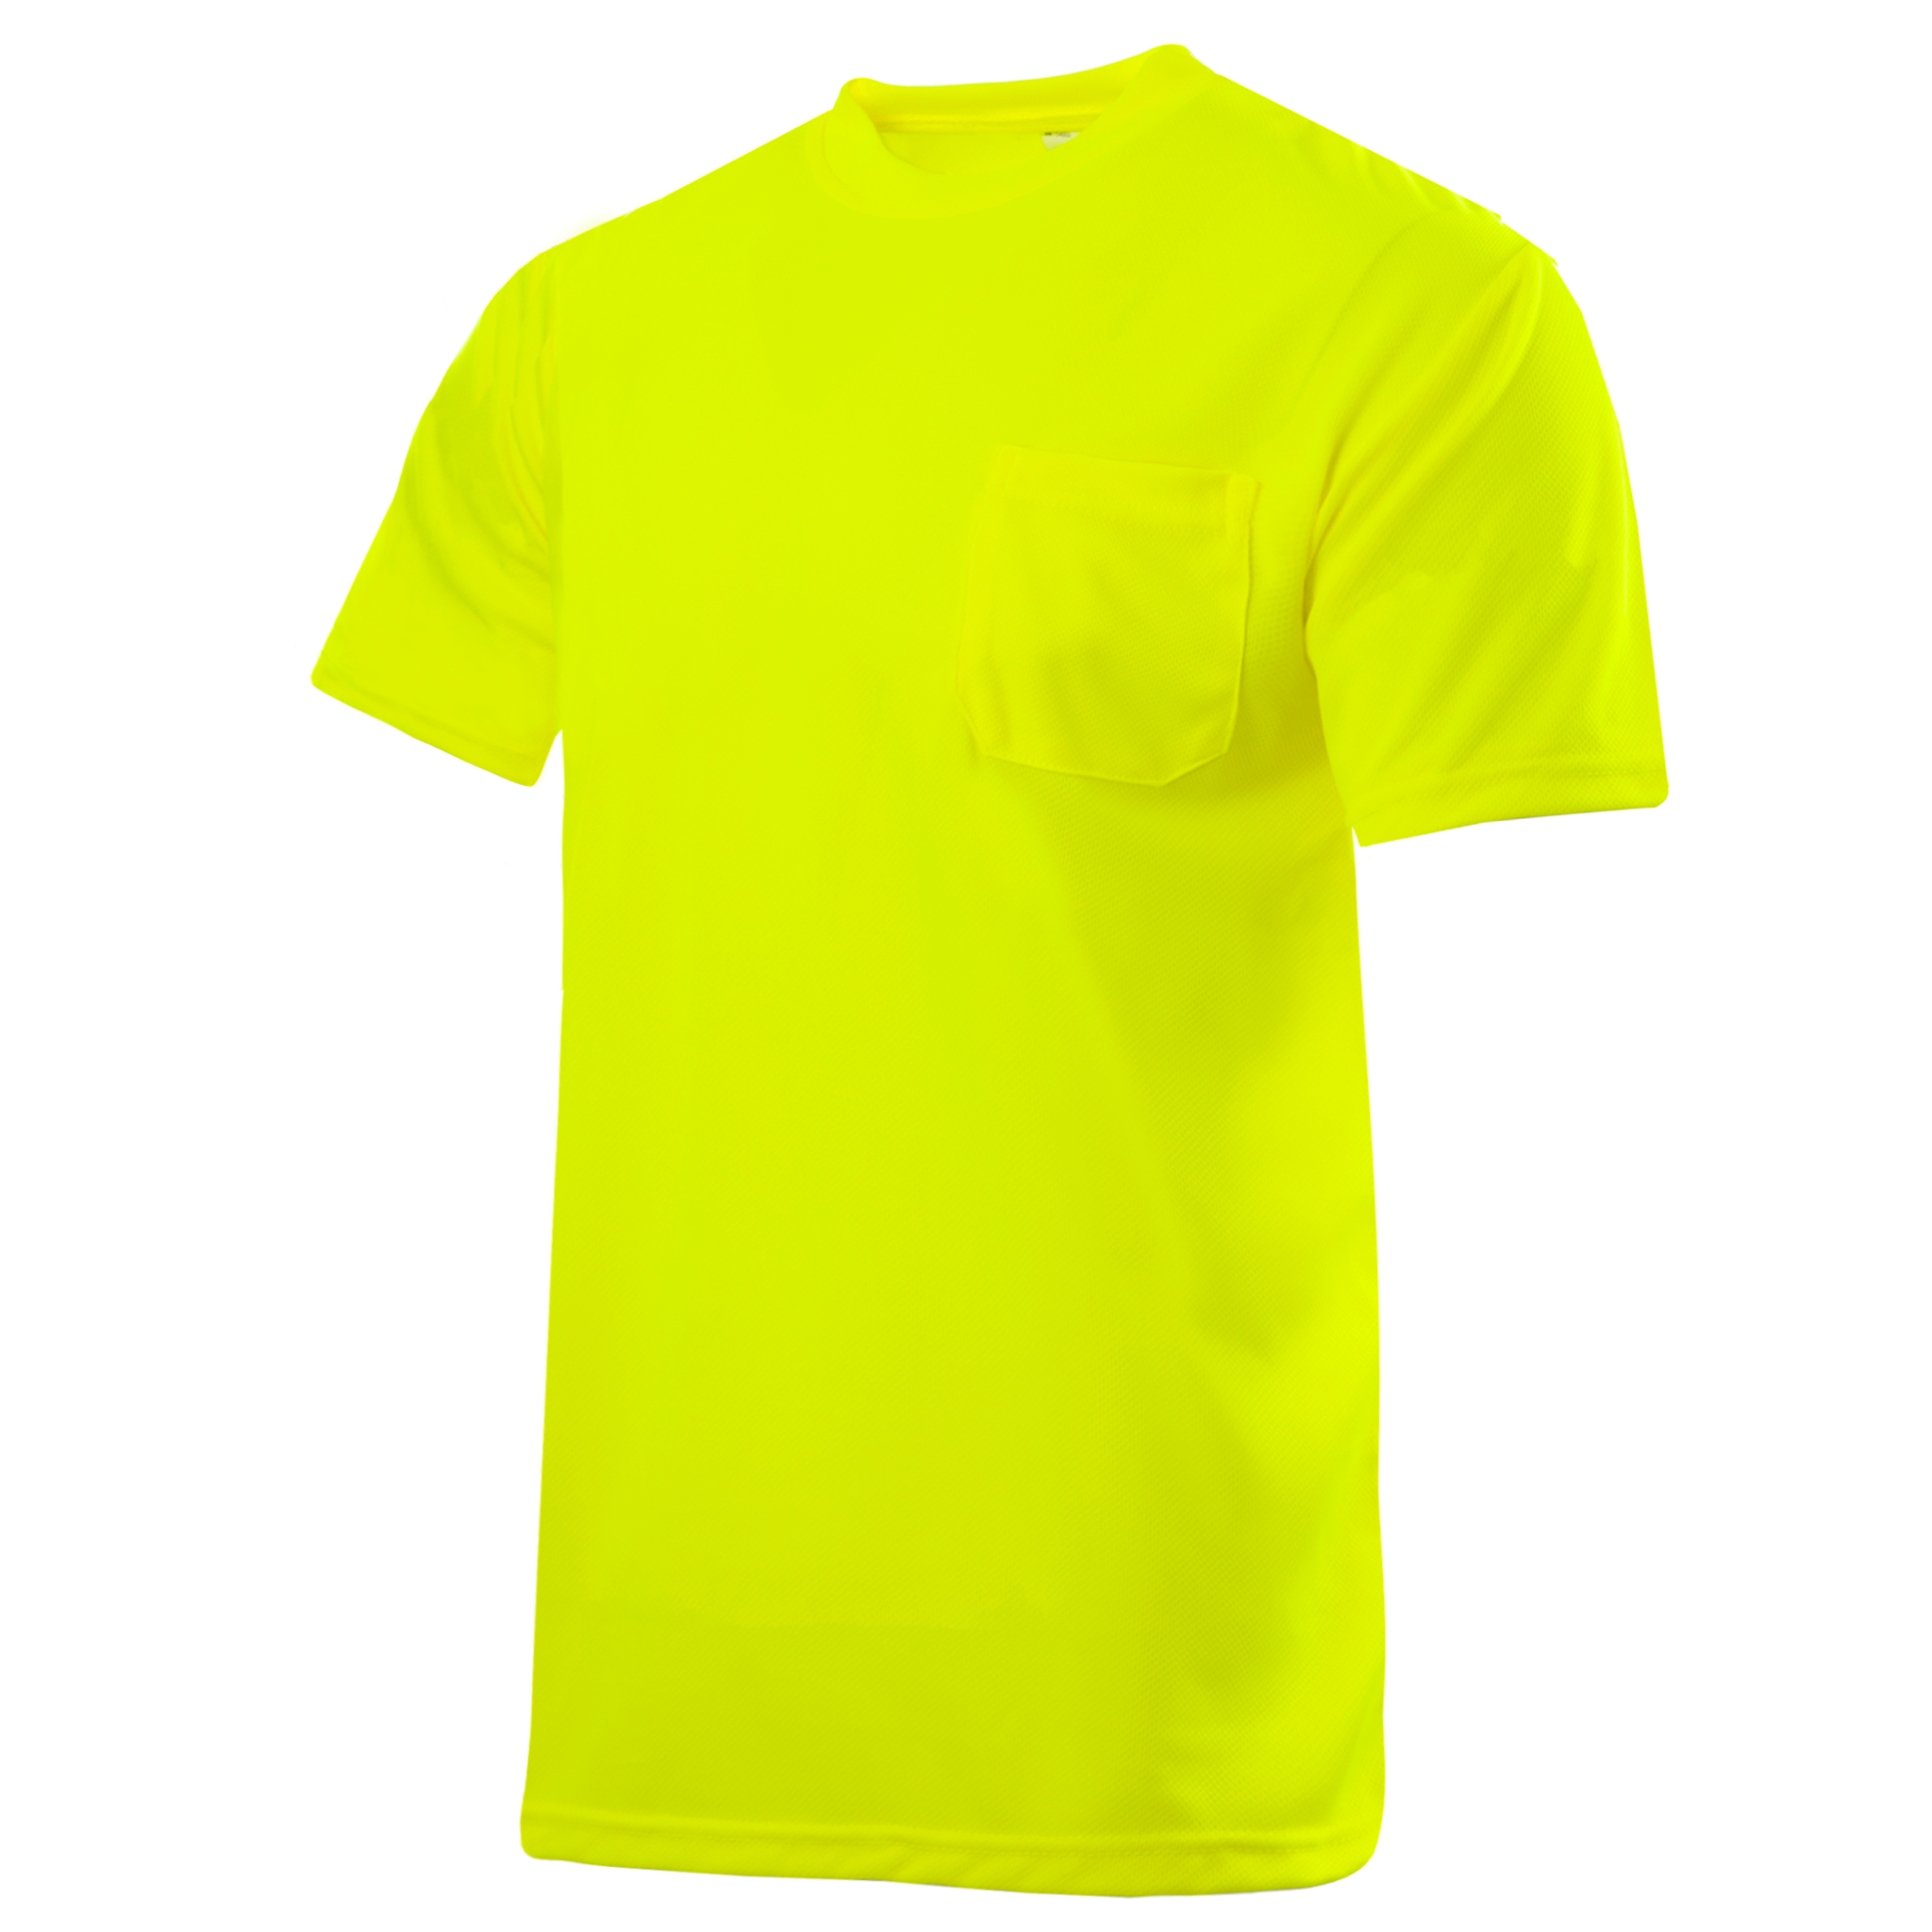 The 606: High Visibility Screen Printed Tshirt Using Reflective Inks